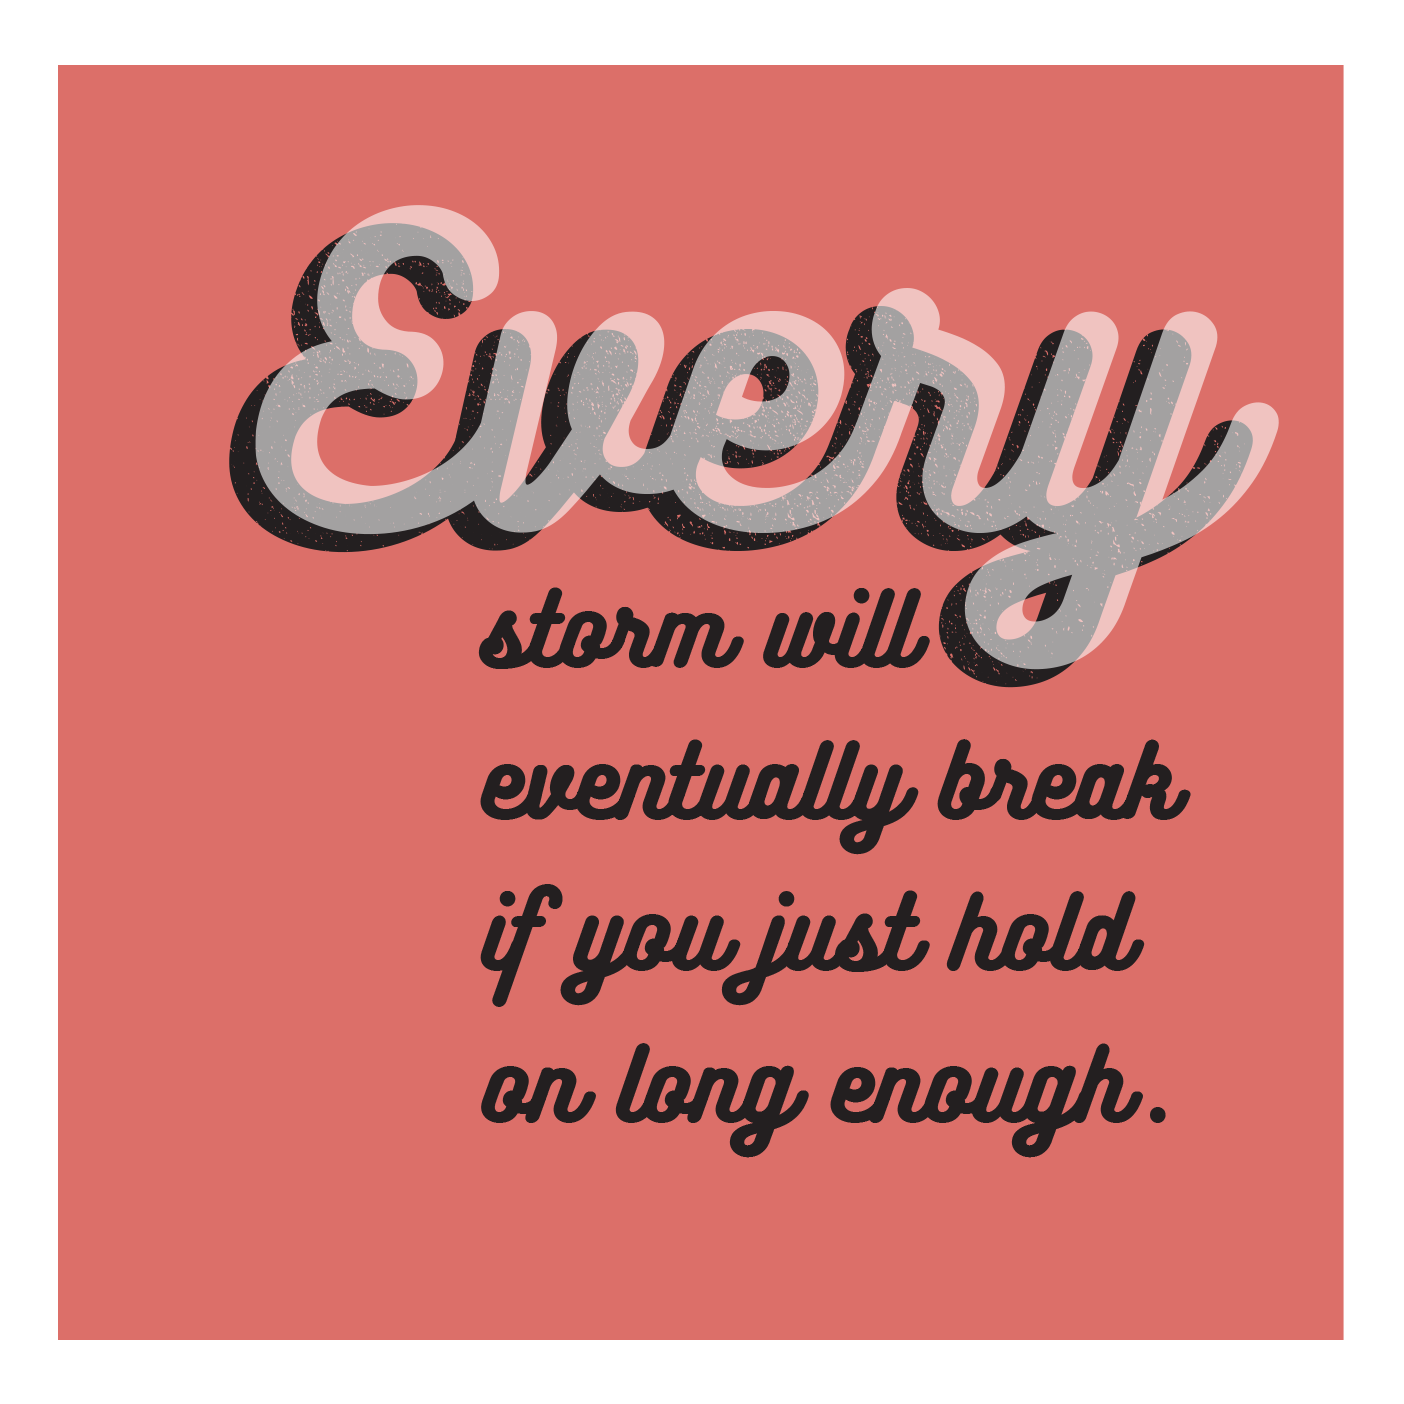 Pull quote: Every storm will eventually break if you just hold on long enough.